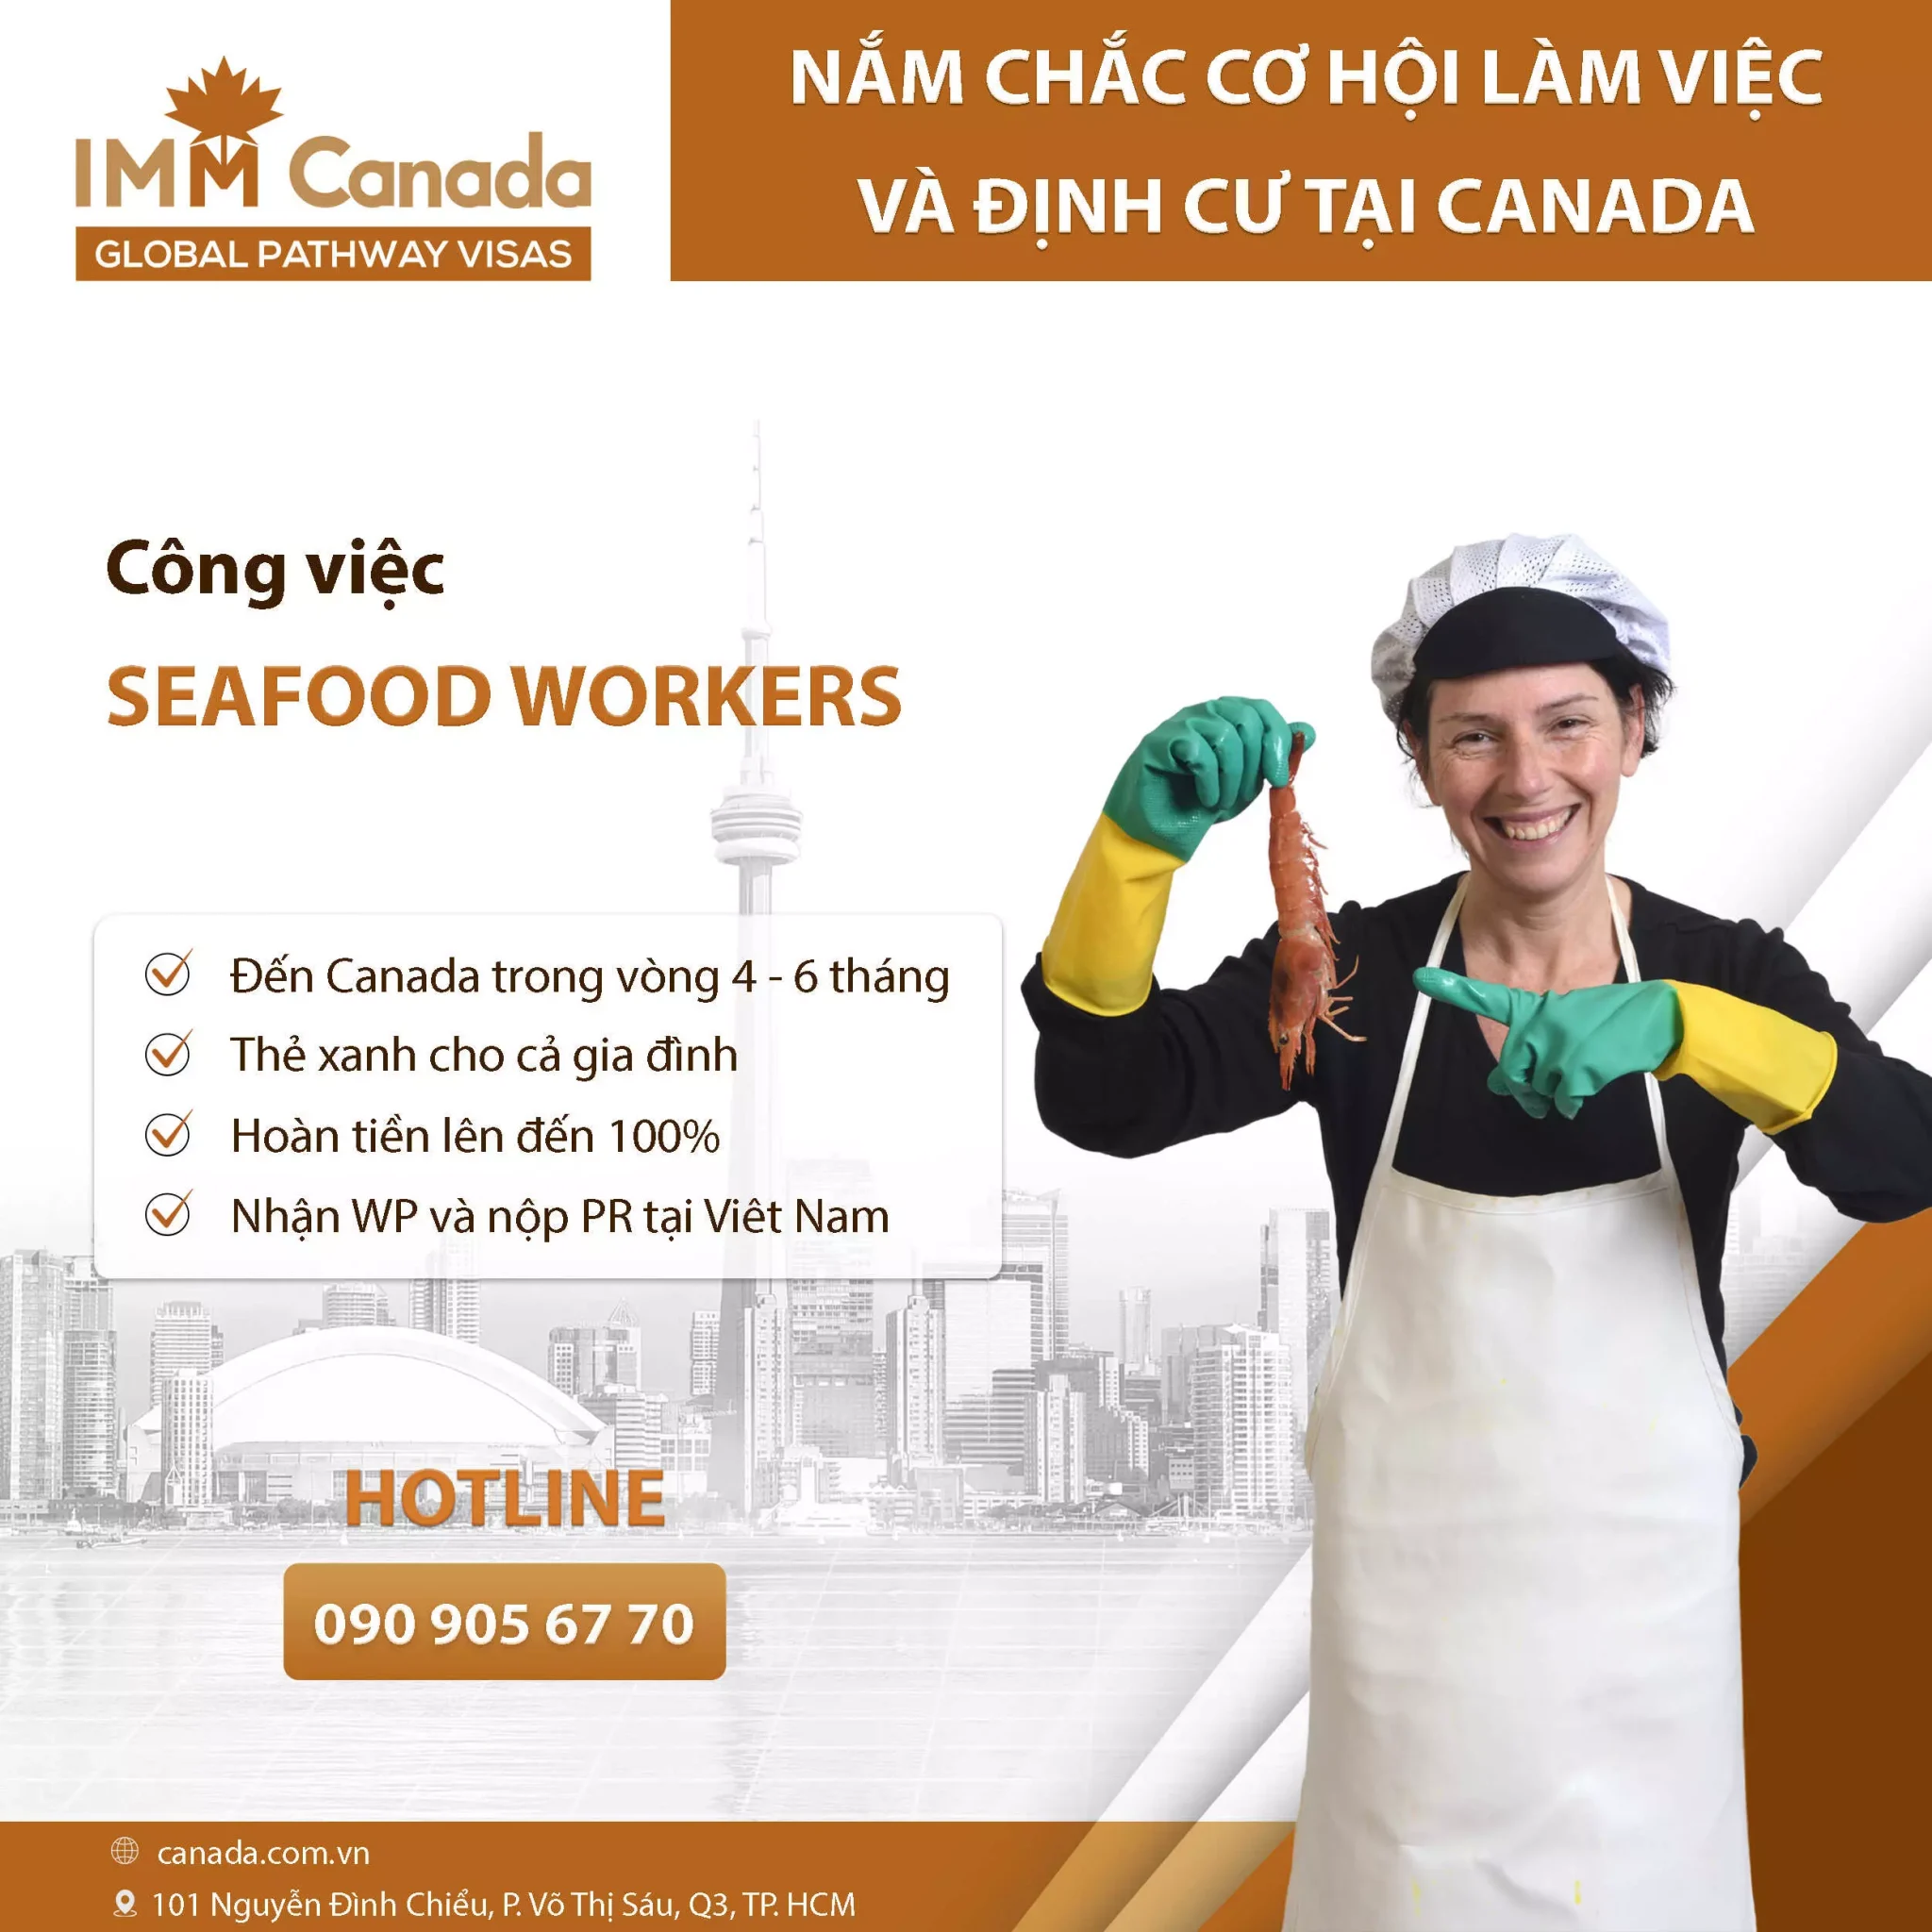 Canada tuyển dụng lao động phổ thông - Seafood Workers